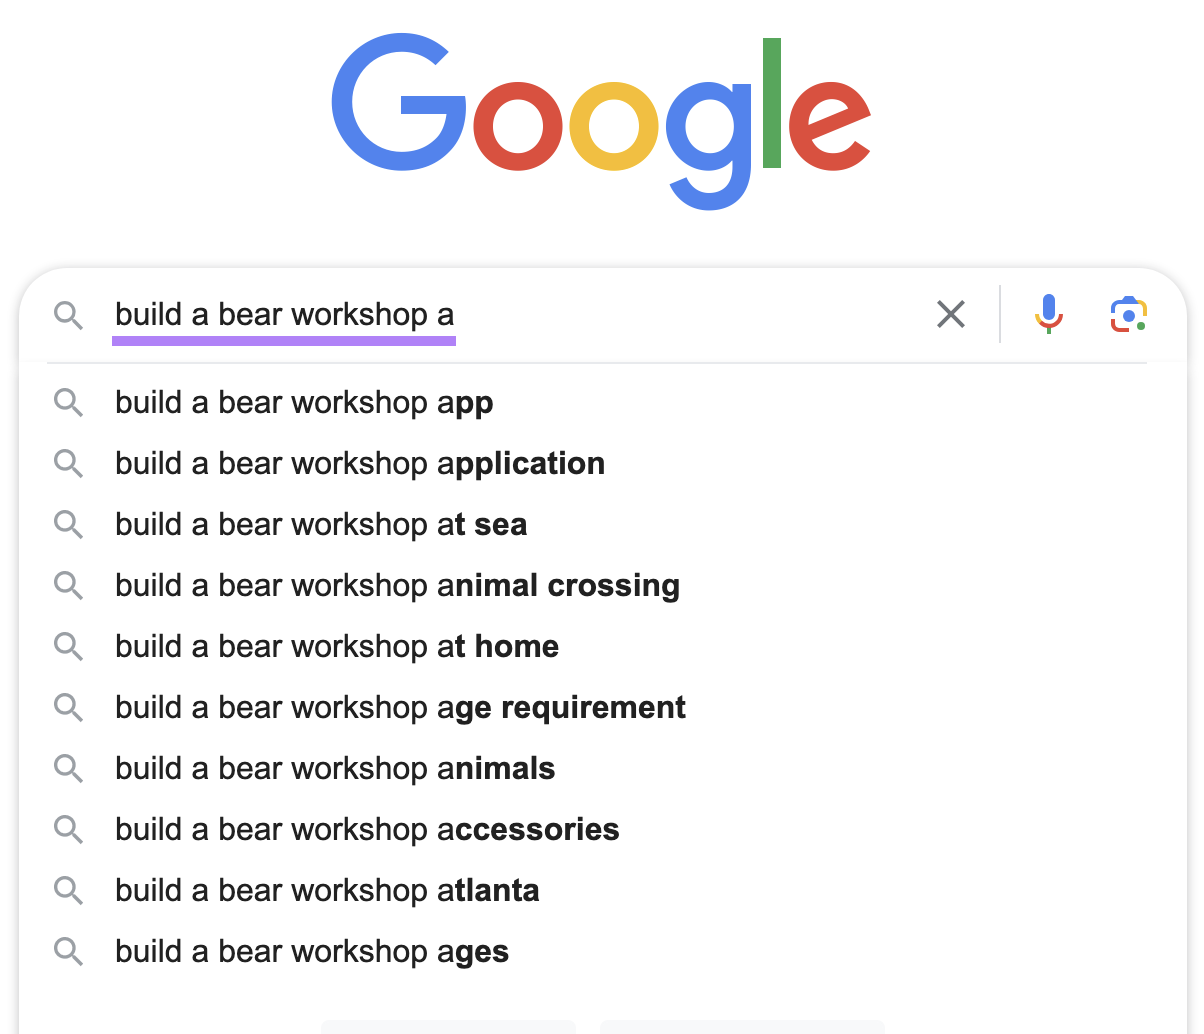 Google suggested searches when typing "build a bear workshop a"